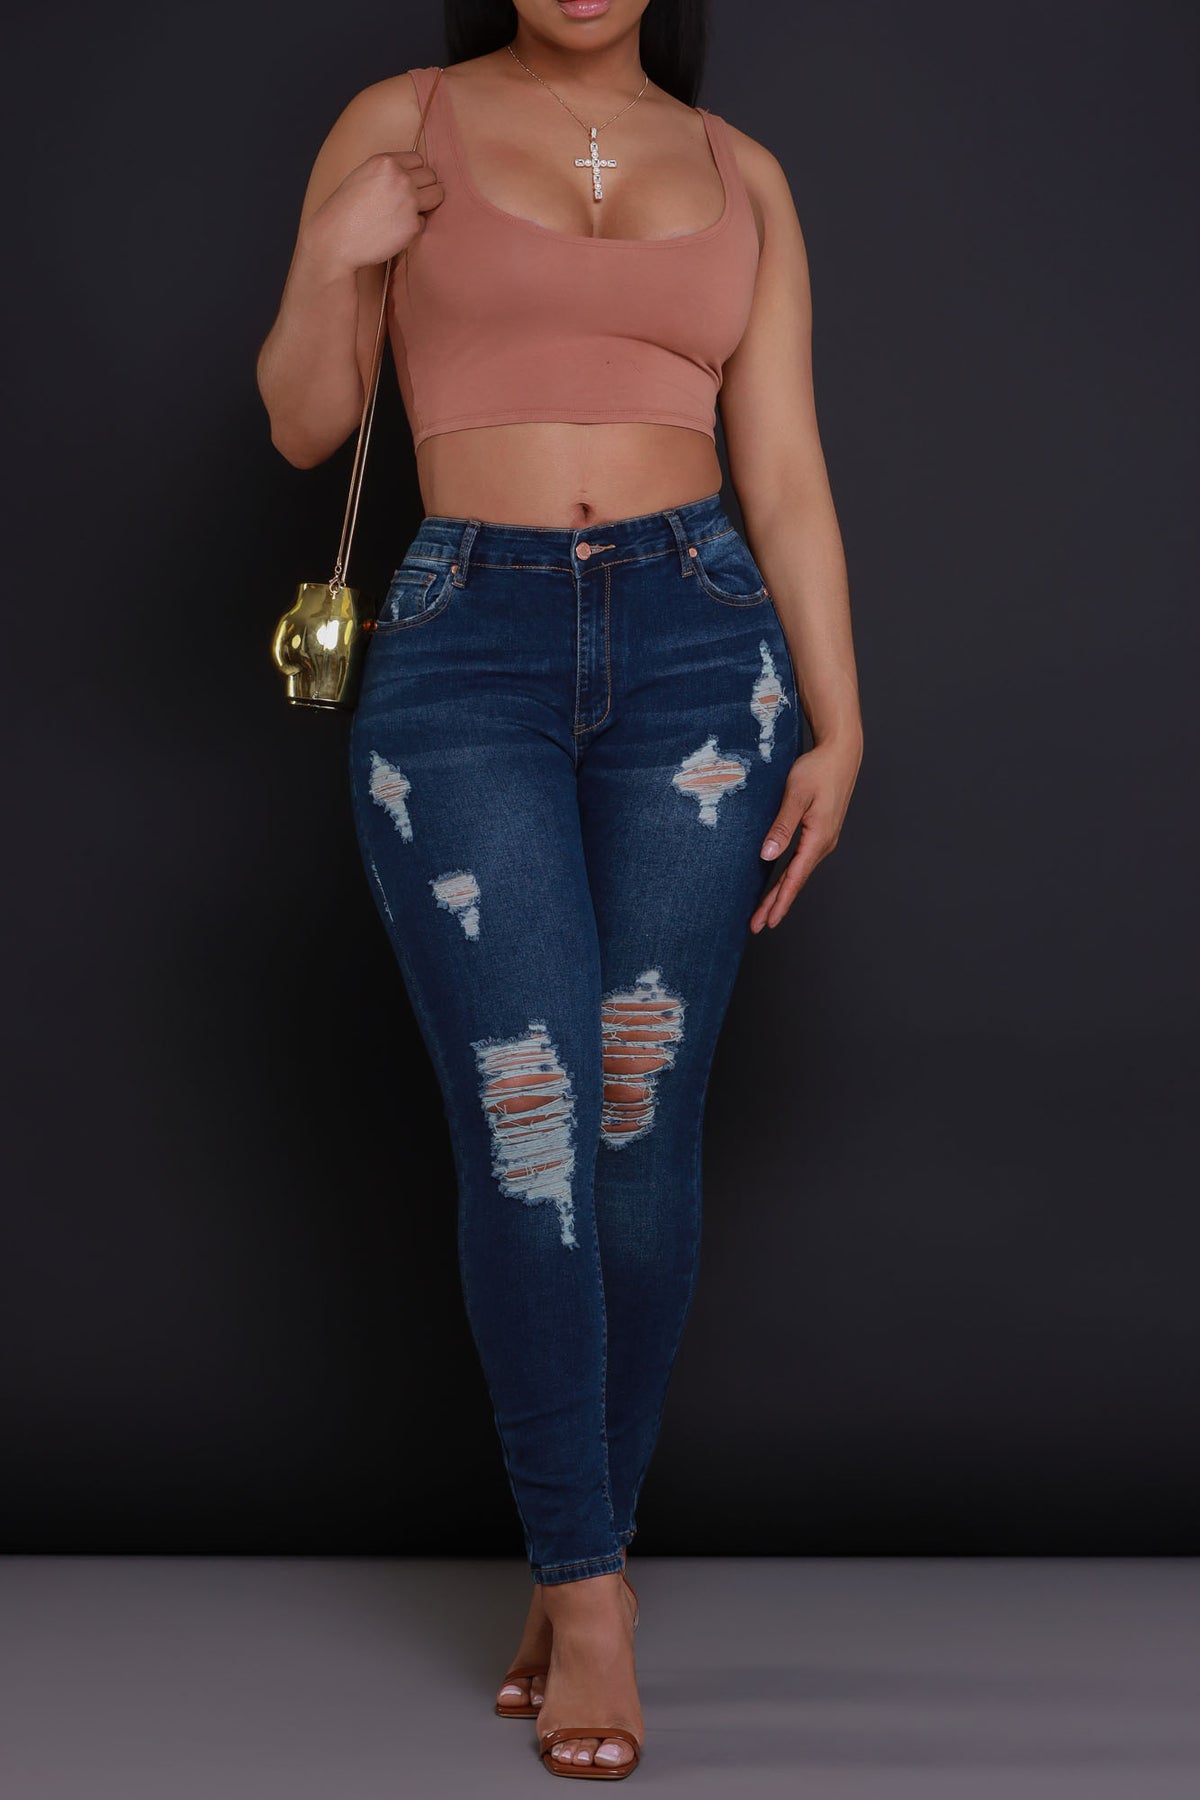 
              Heads Or Tails Hourglass Distressed Stretchy Jeans - Dark Wash - Swank A Posh
            